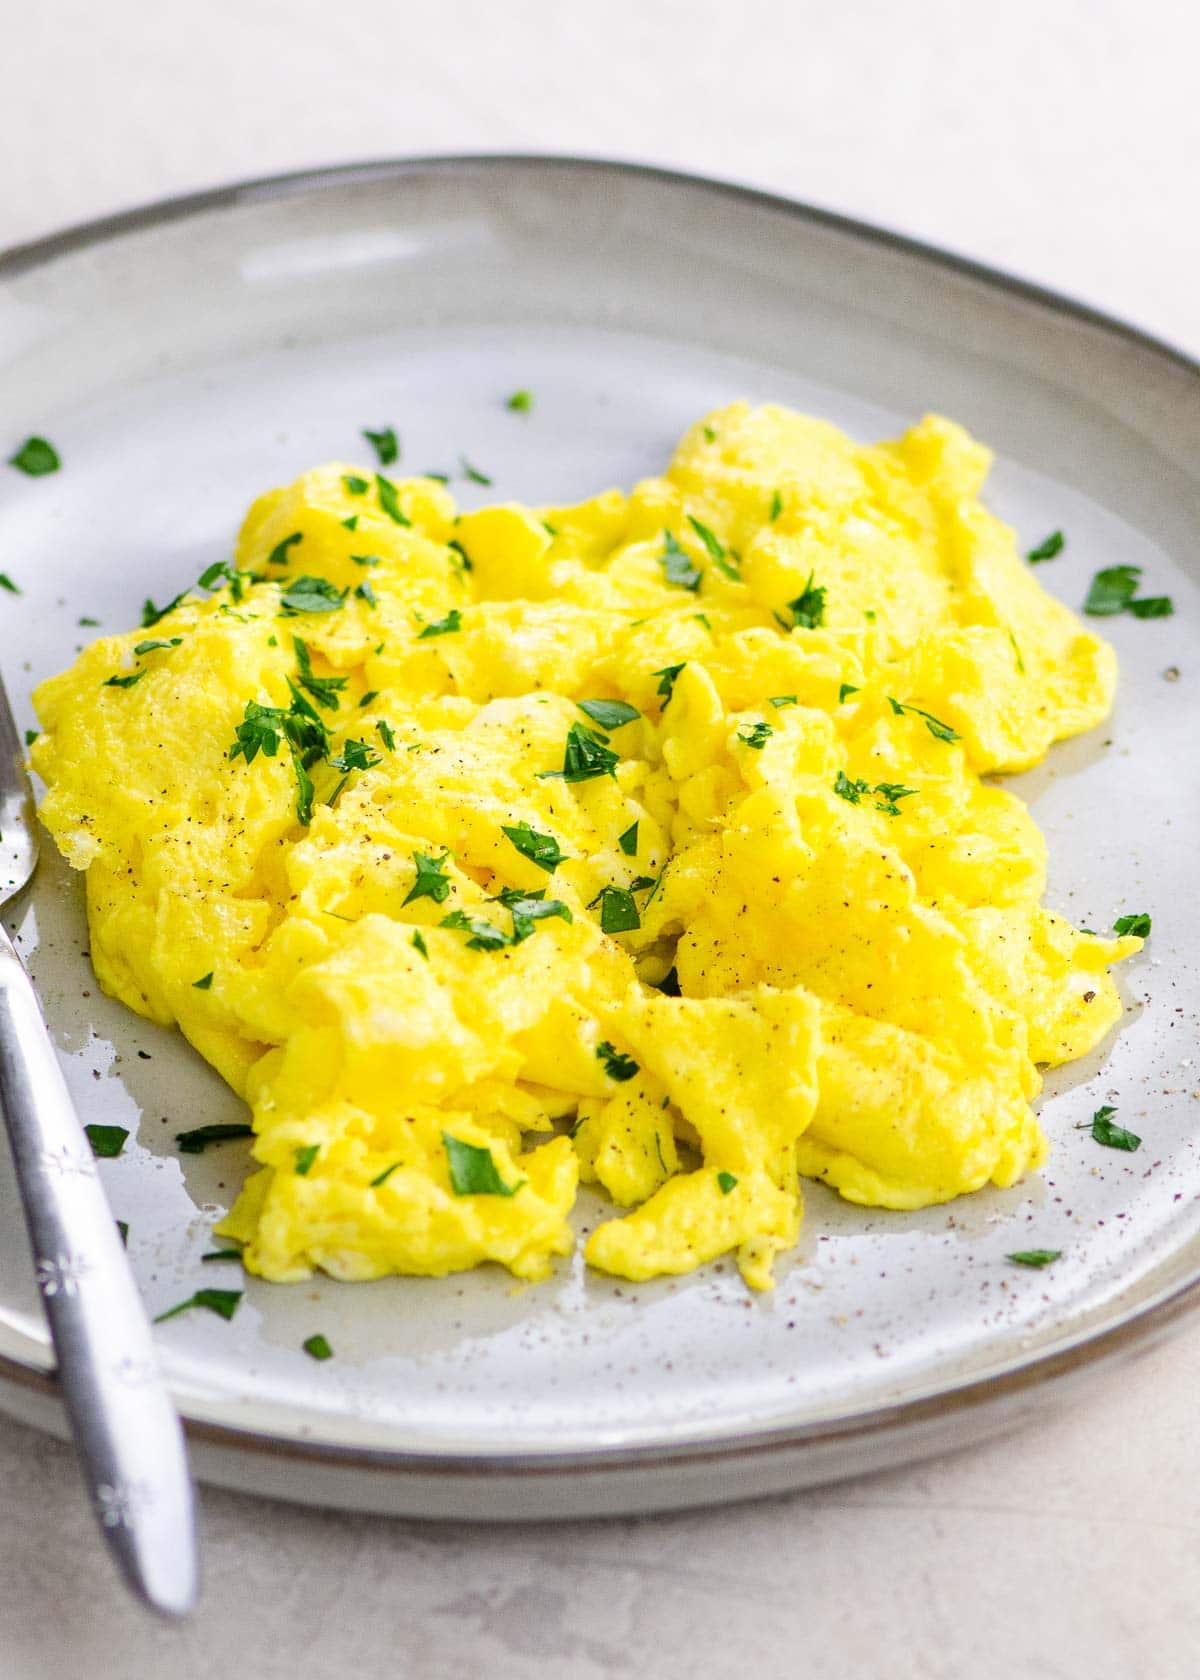 American scrambled eggs on a plate with a fork